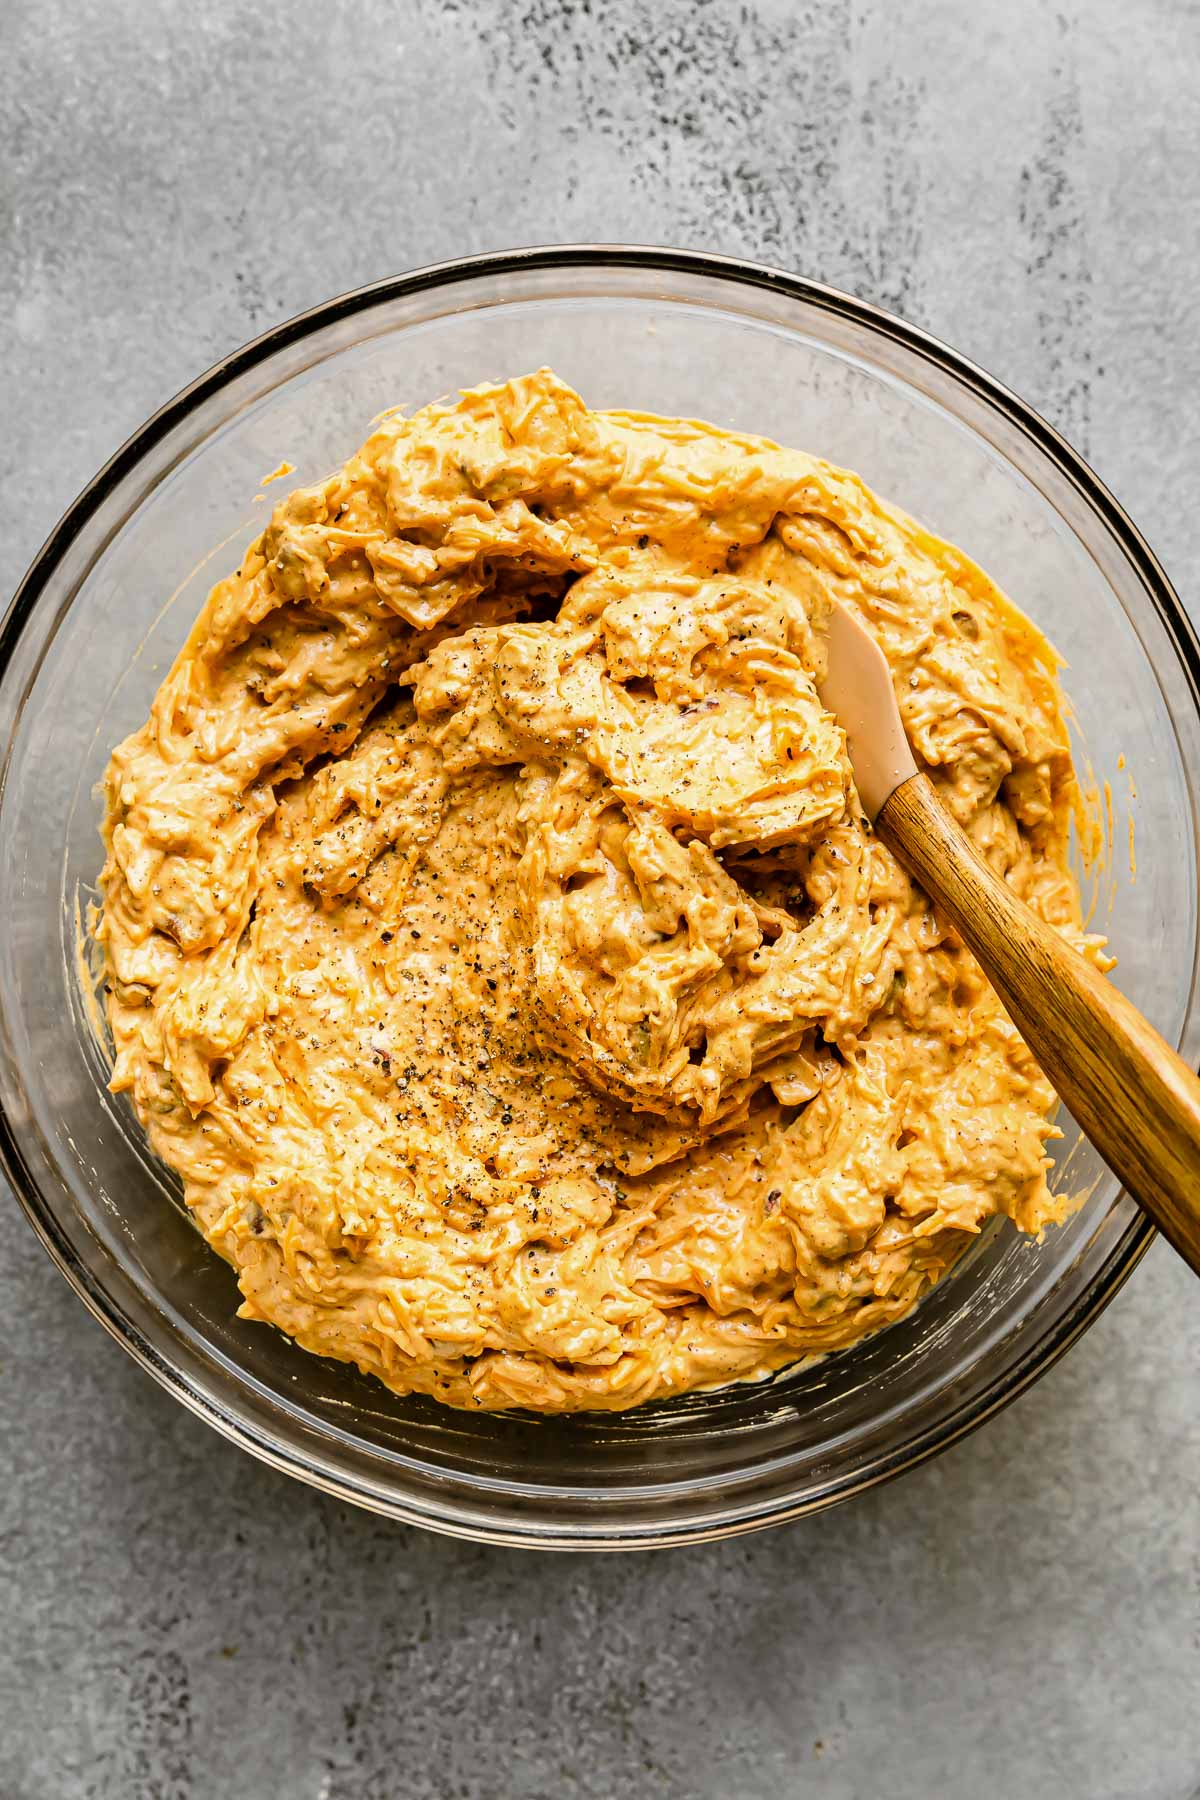 Pumpkin cheeseball mixture fills a large glass mixing bowl that sits atop a gray textured surface. A spatula with a wooden handle rests inside of the bowl for mixing.